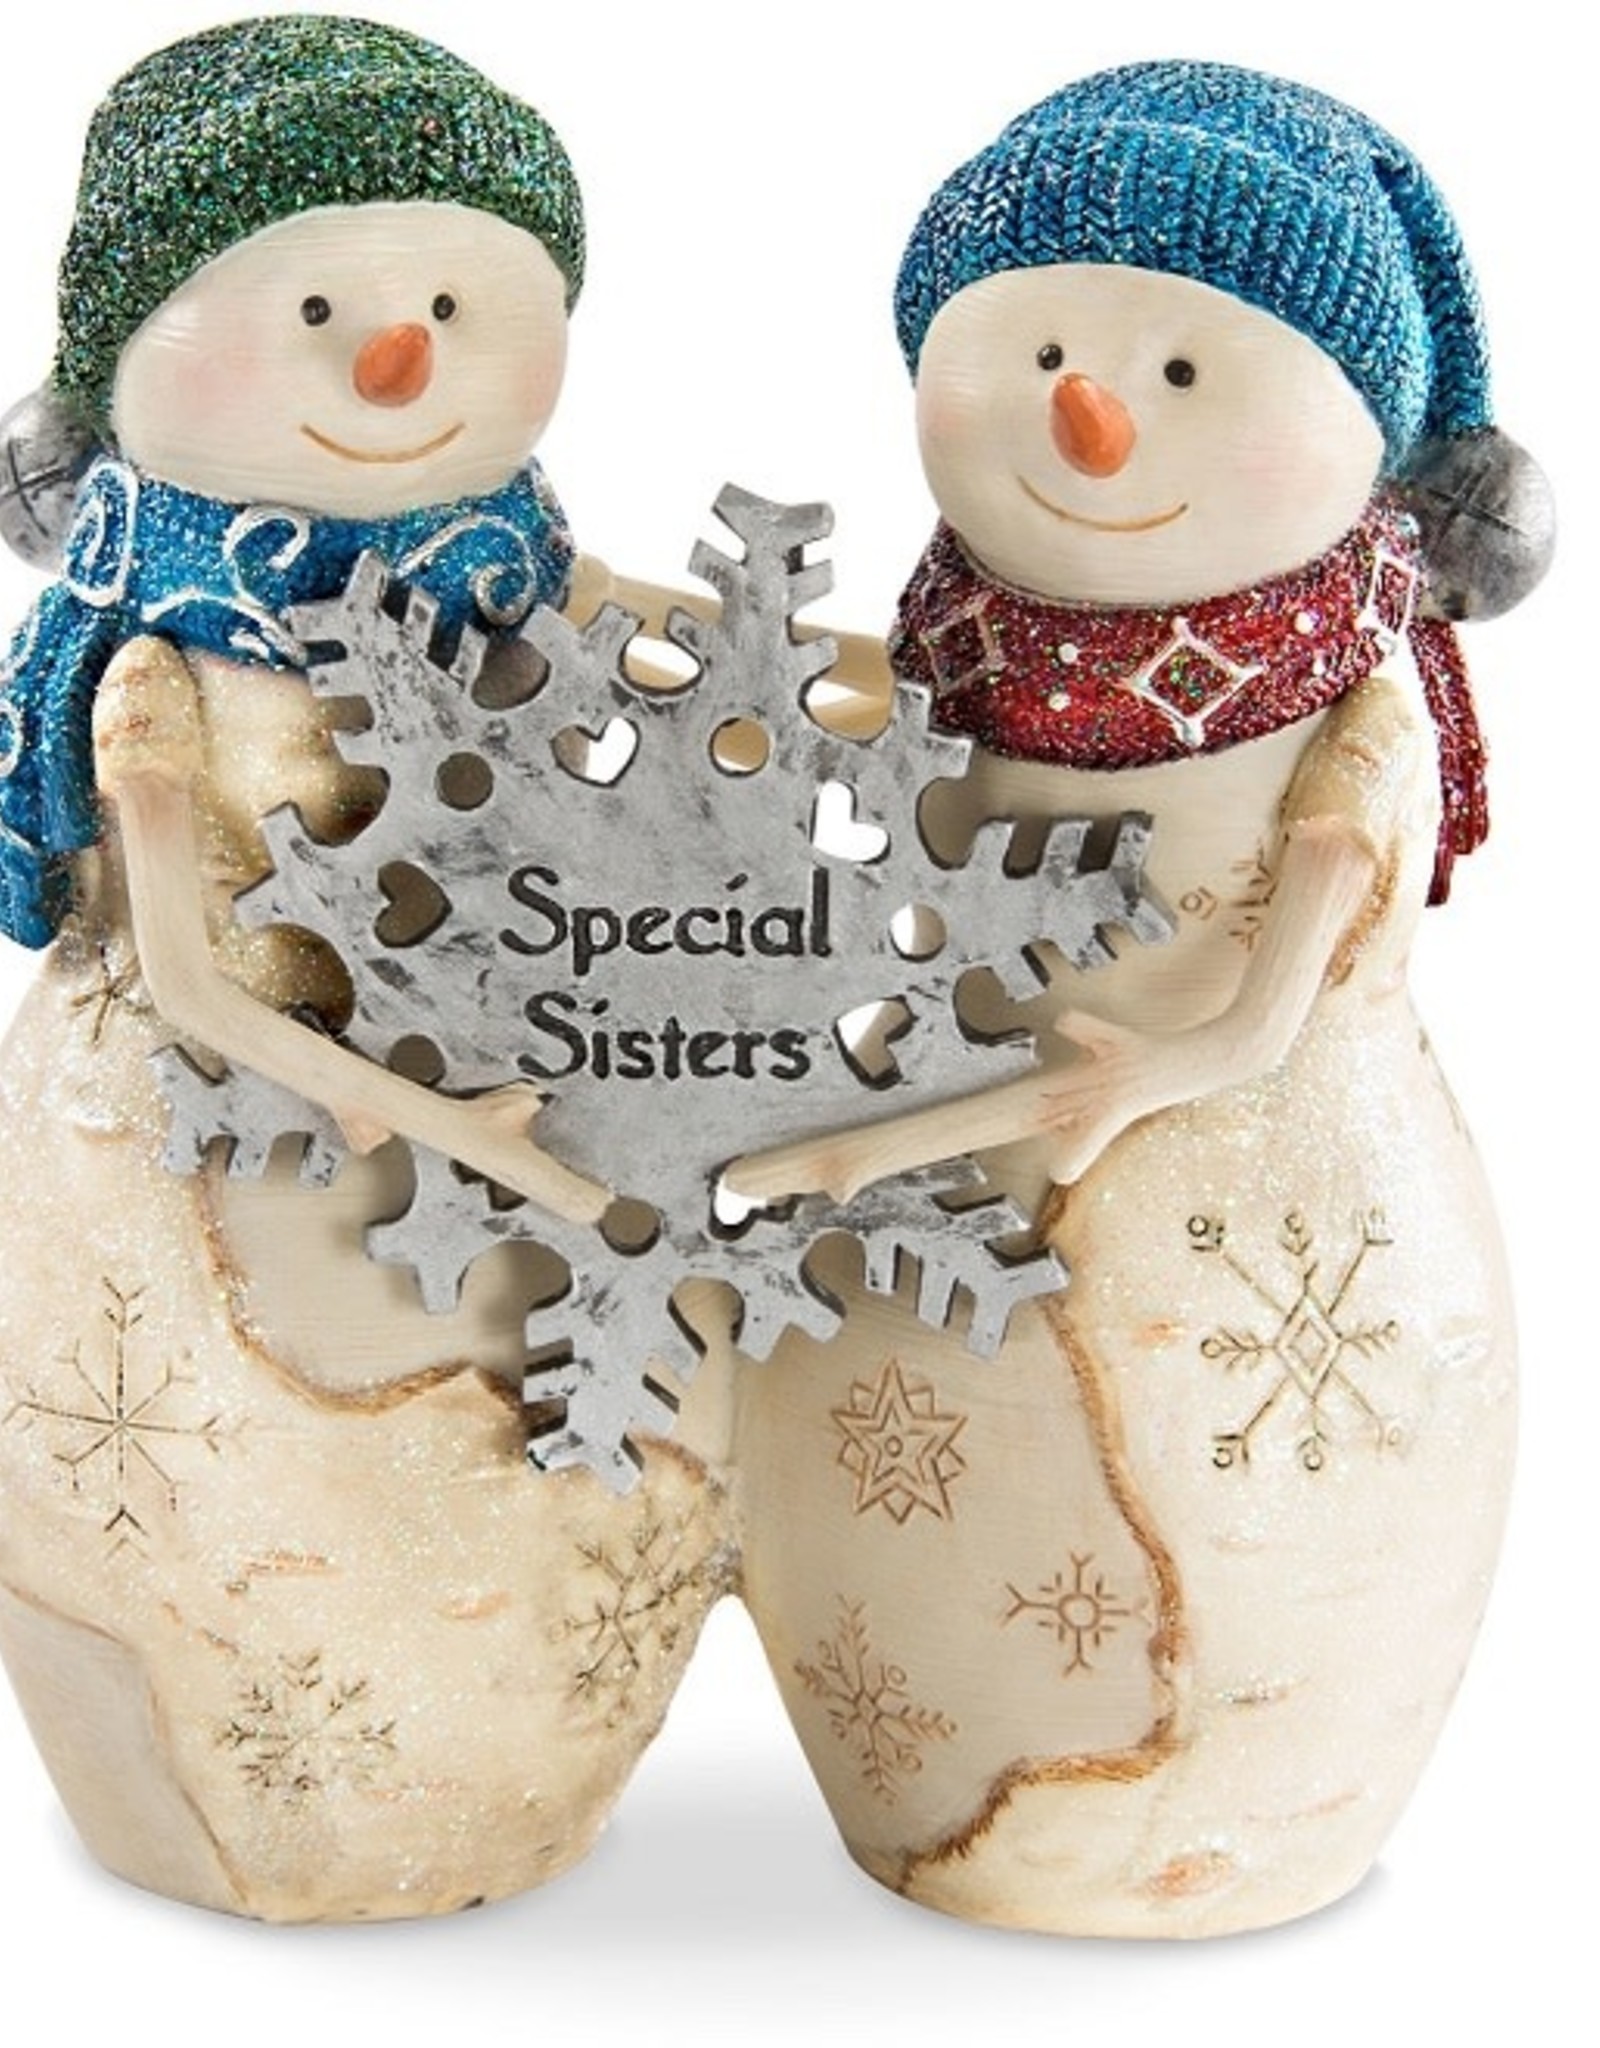 Pavilion Gift SPECIAL SISTERS BIRCHHEARTS SNOWMAN